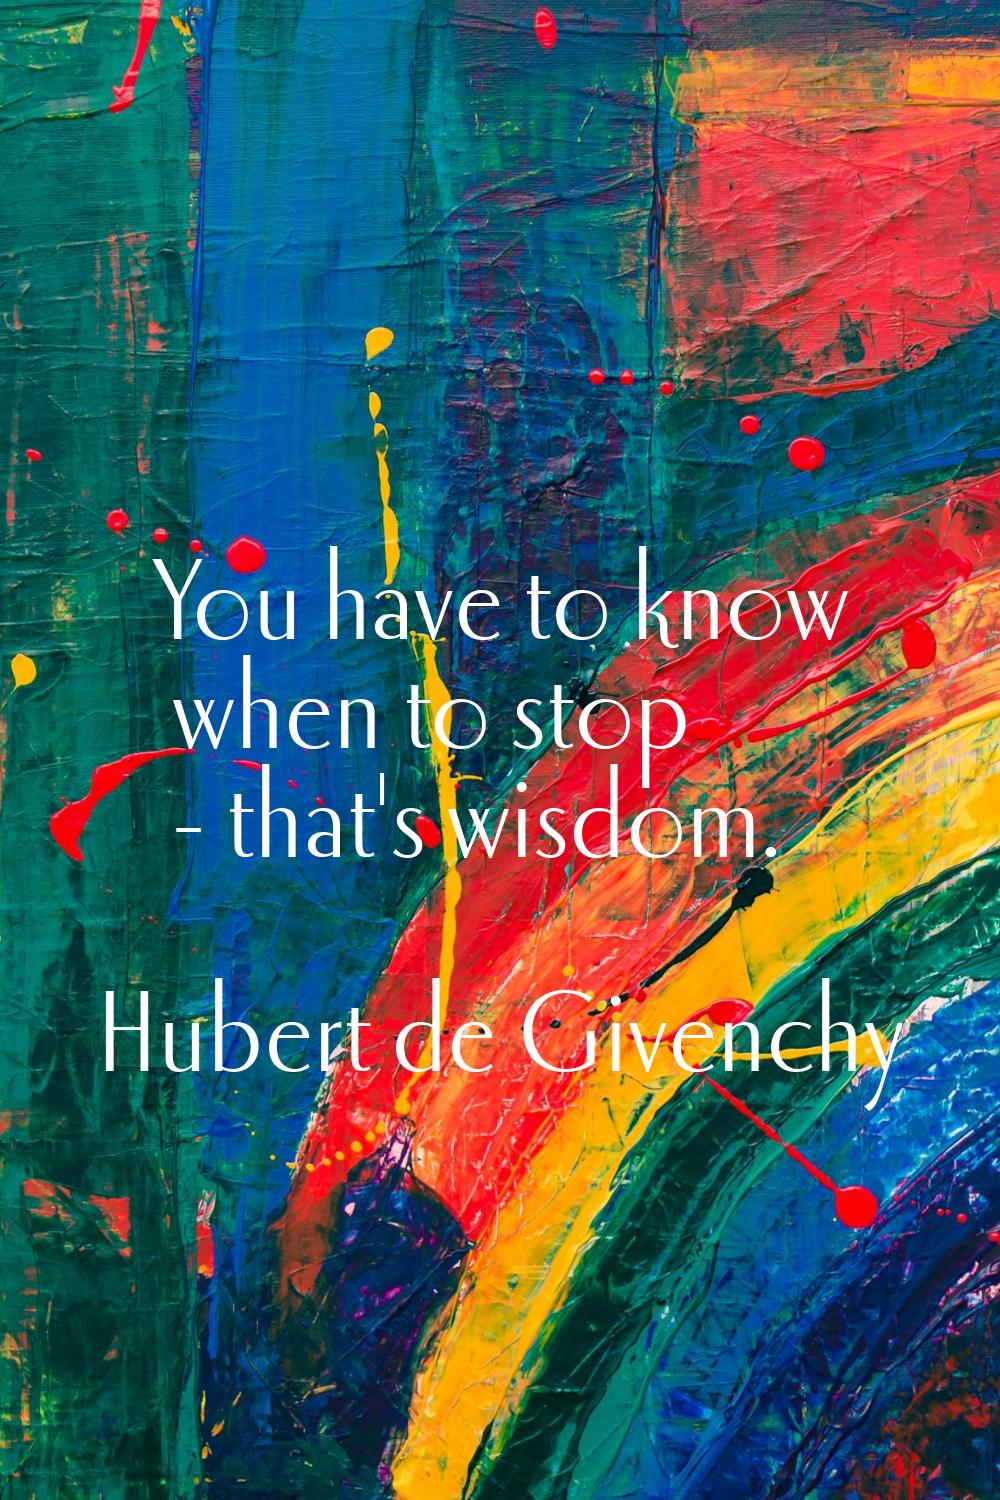 You have to know when to stop - that's wisdom.